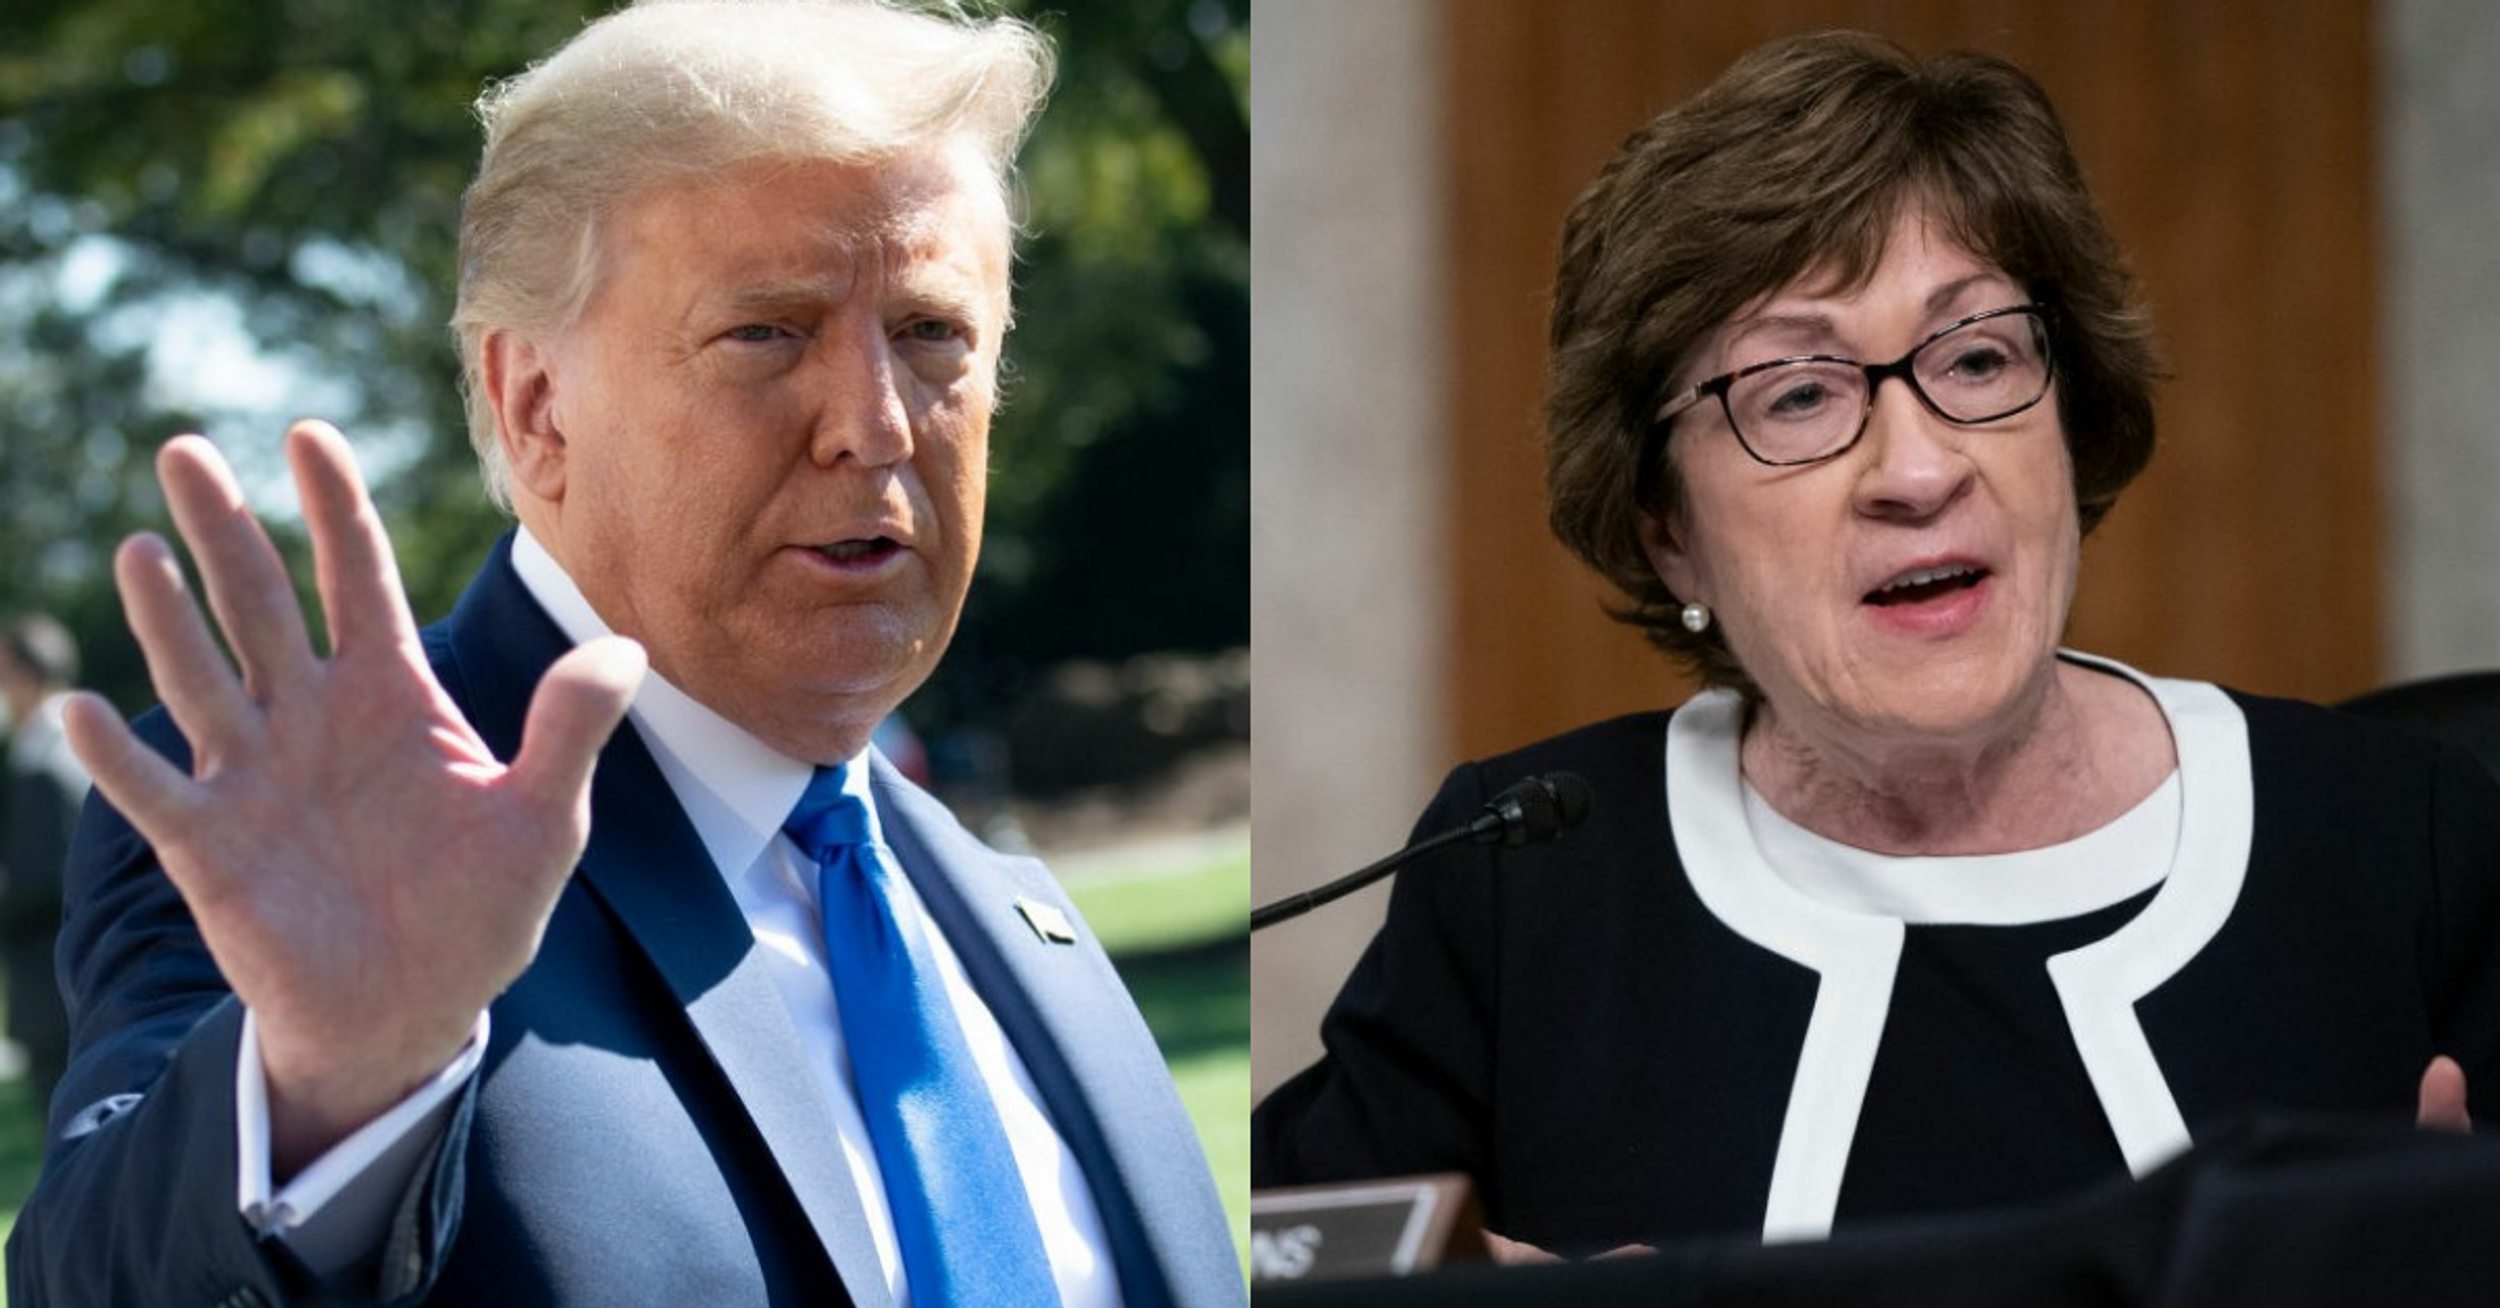 Trump Just Lashed Out at 'Not Worth the Work' Susan Collins on Twitter Right Before Her Election